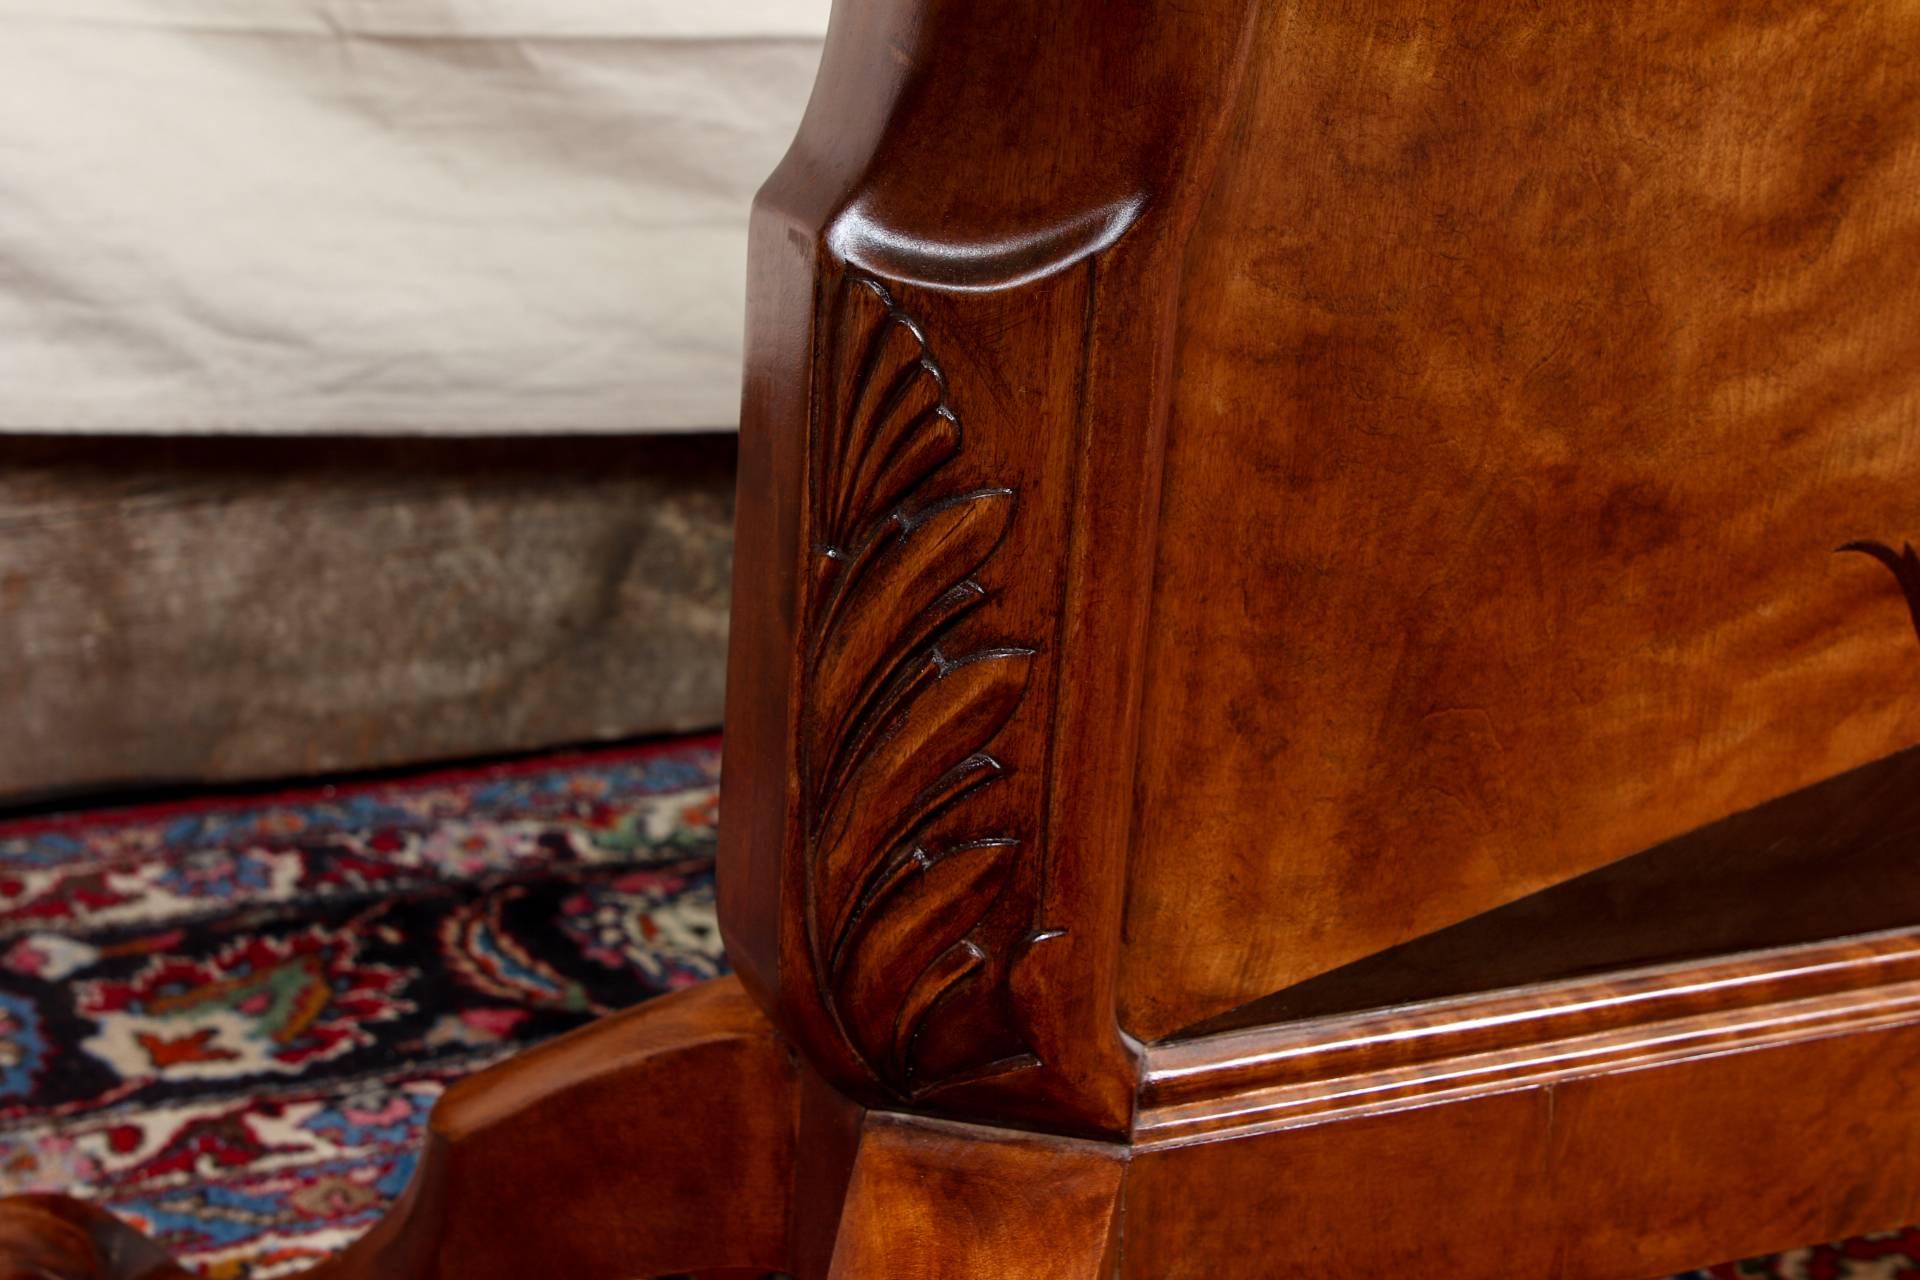 With a narrow rectangular support with open demilune ends, a burled panel with a dark wood palmette inlay on both sides, and carved acanthus leaves on the ends. Raised on outswept legs with paw feet. With a rectangular bevelled glass top.
Wood